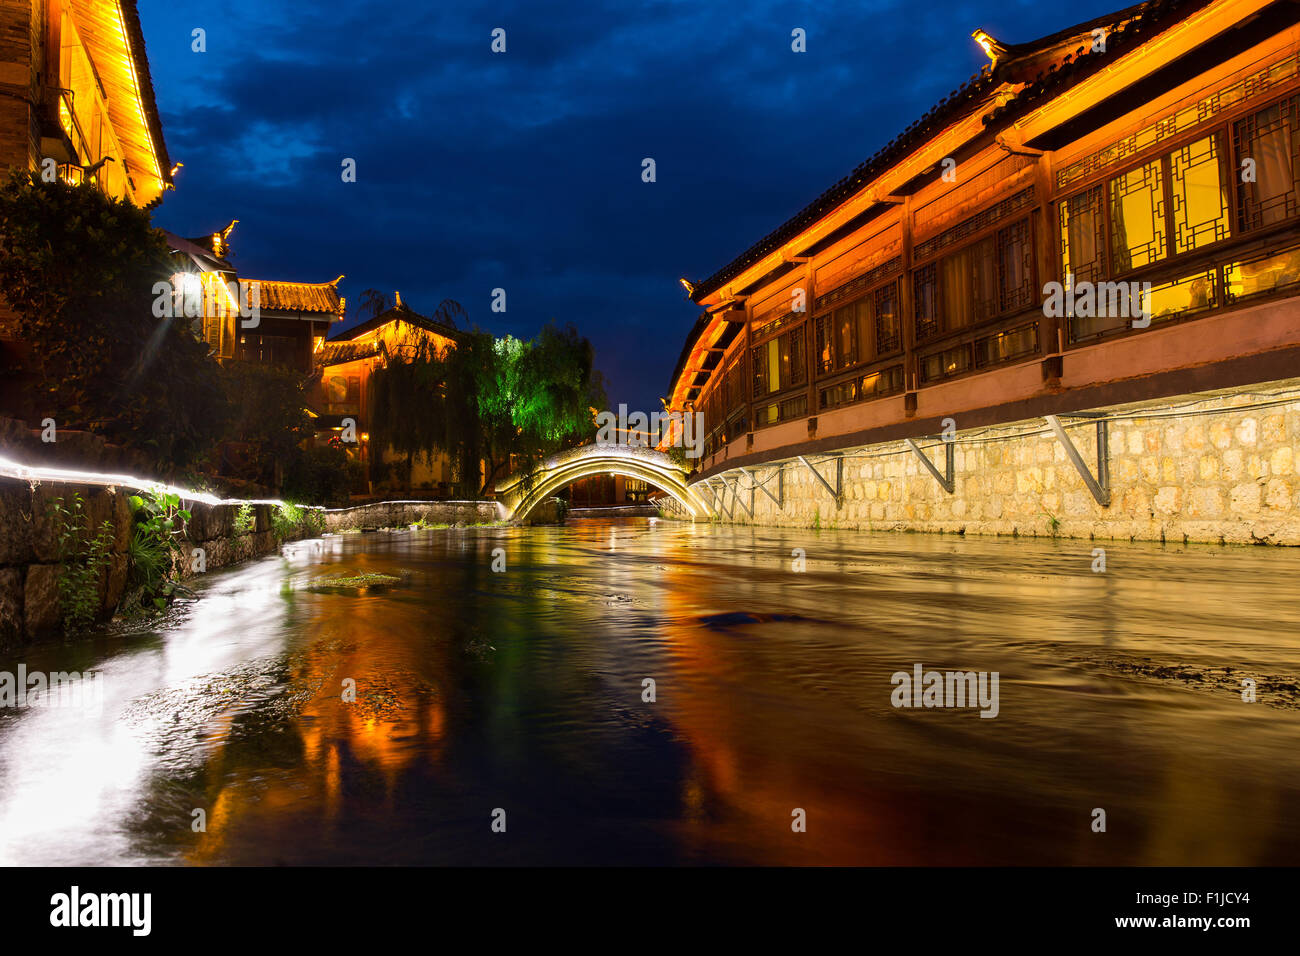 famous tourist destination in China - Lijiang old town in evening Stock Photo